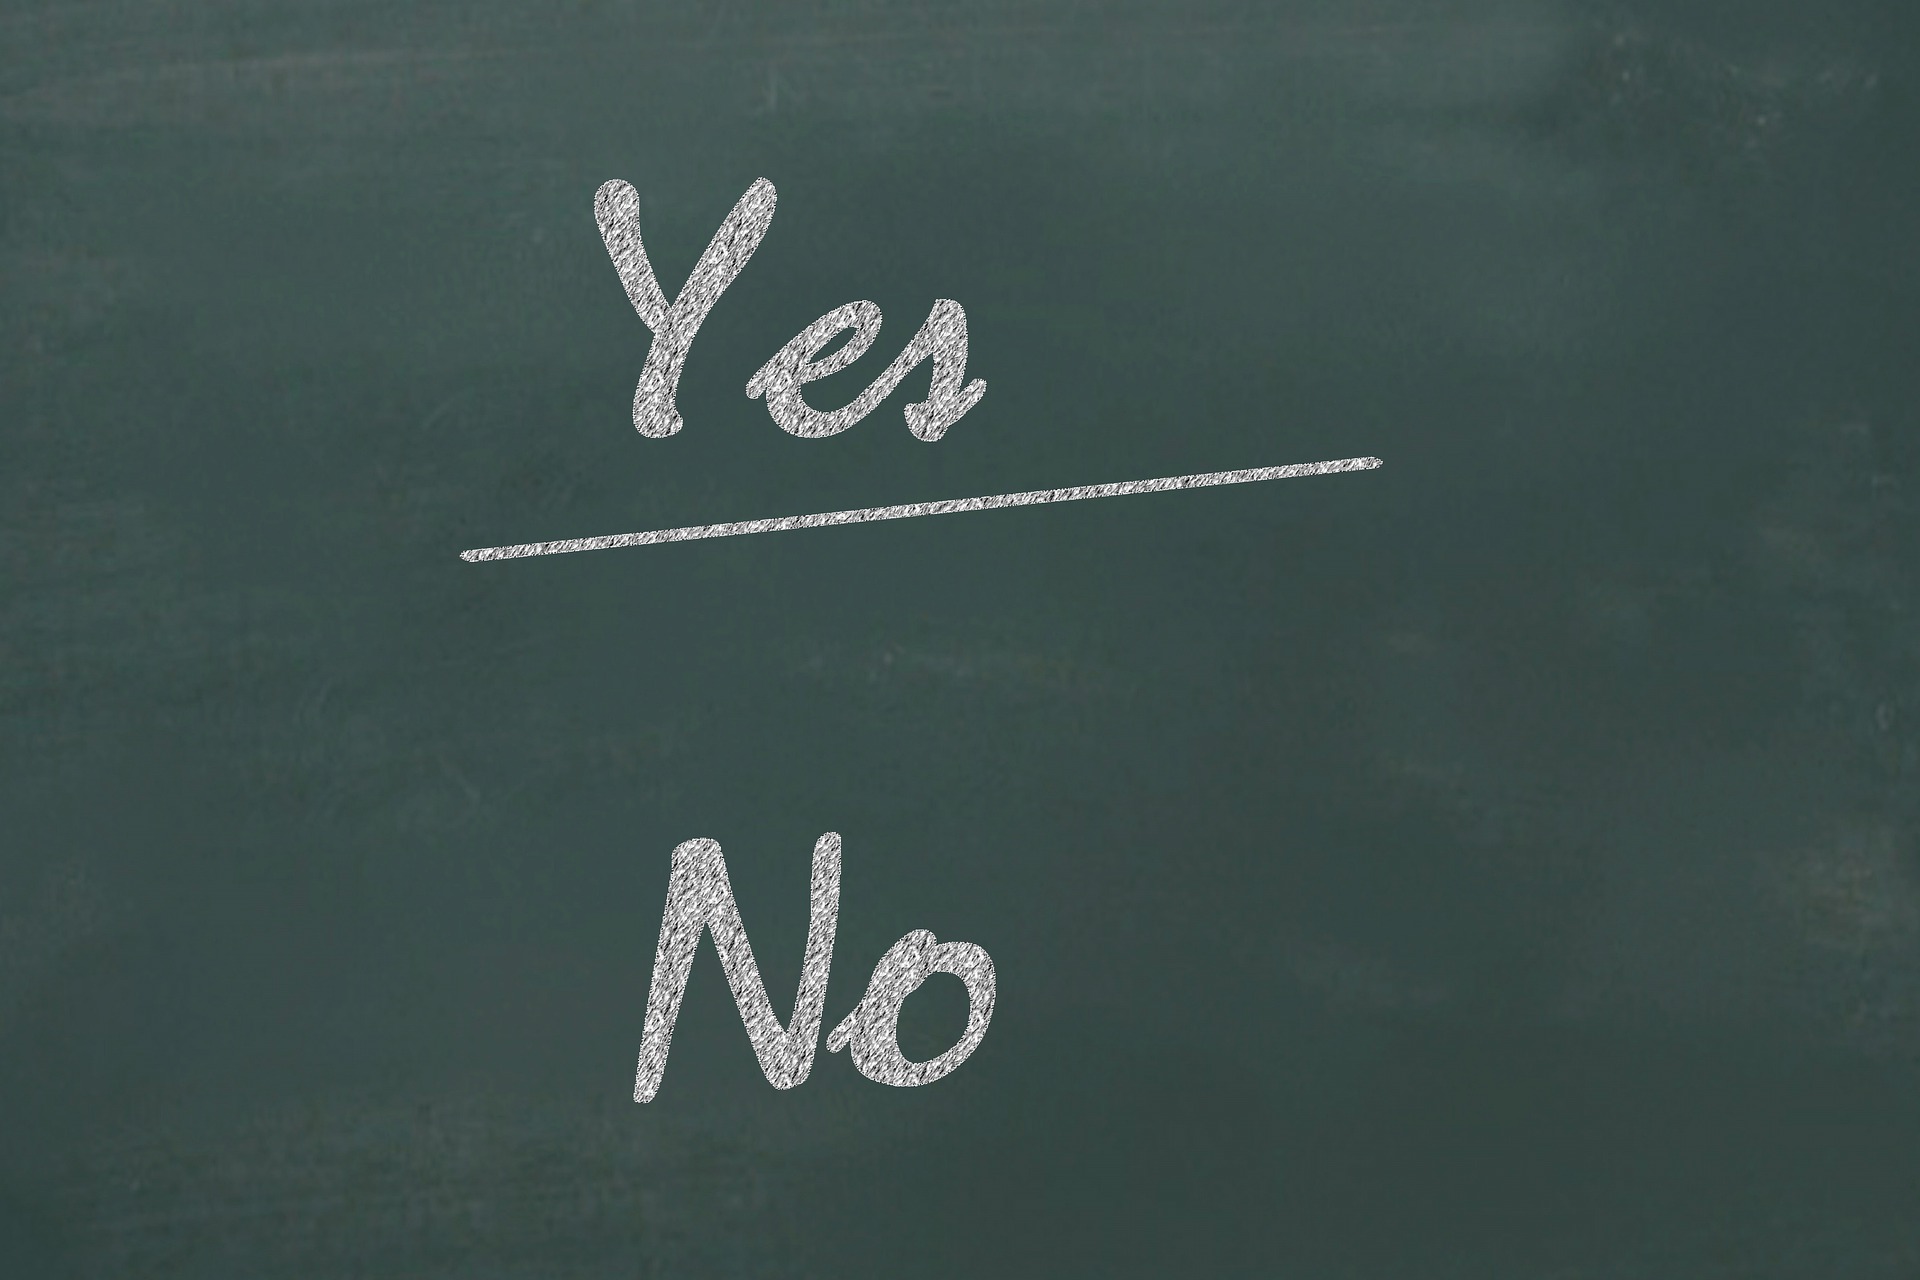 A blackboard written with 'Yes' and 'No', with yes underlined on it.